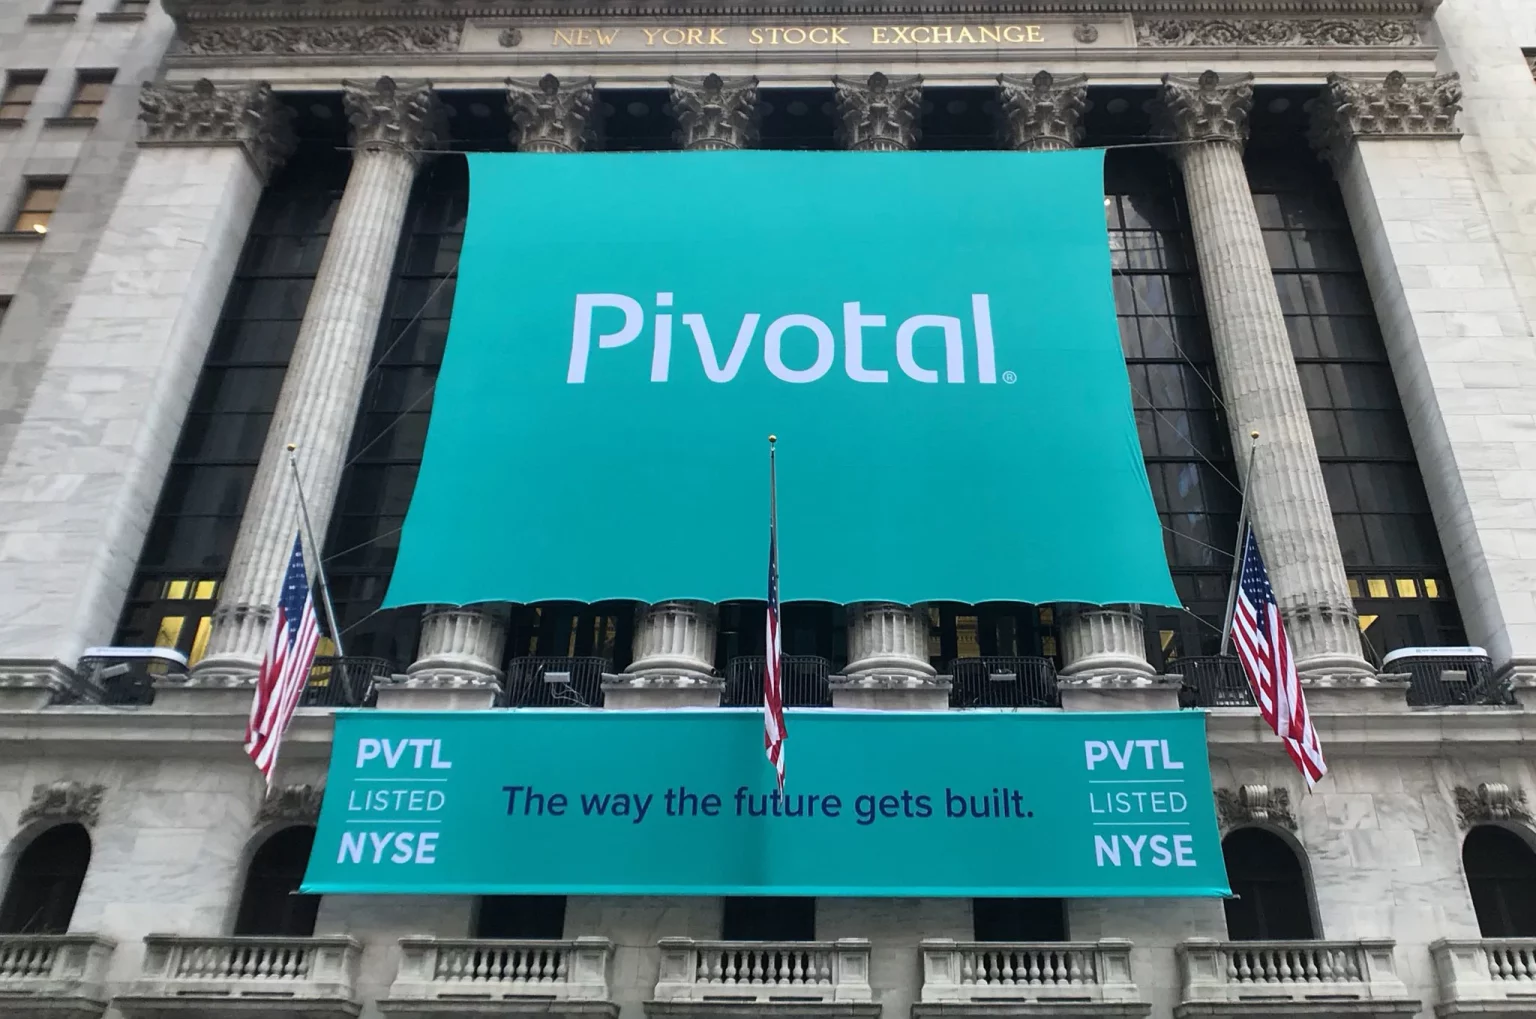 VMware Completes Its $2.7B Acquisition Of Pivotal, Originally Announced In August (Ron Miller/TechCrunch)